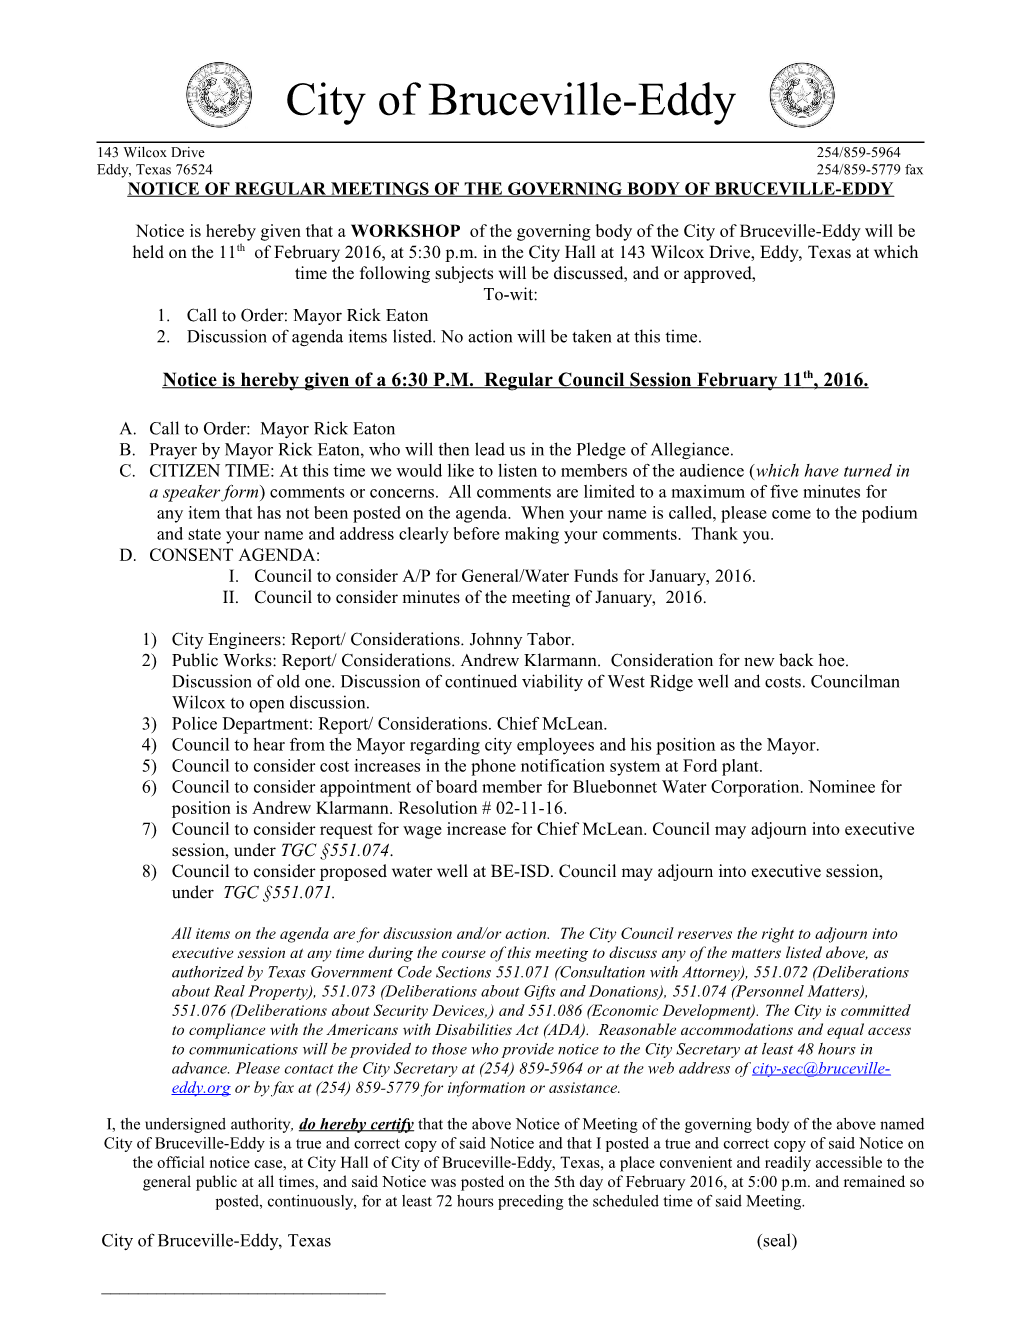 Notice of Regular Meetings of the Governing Body of Bruceville-Eddy